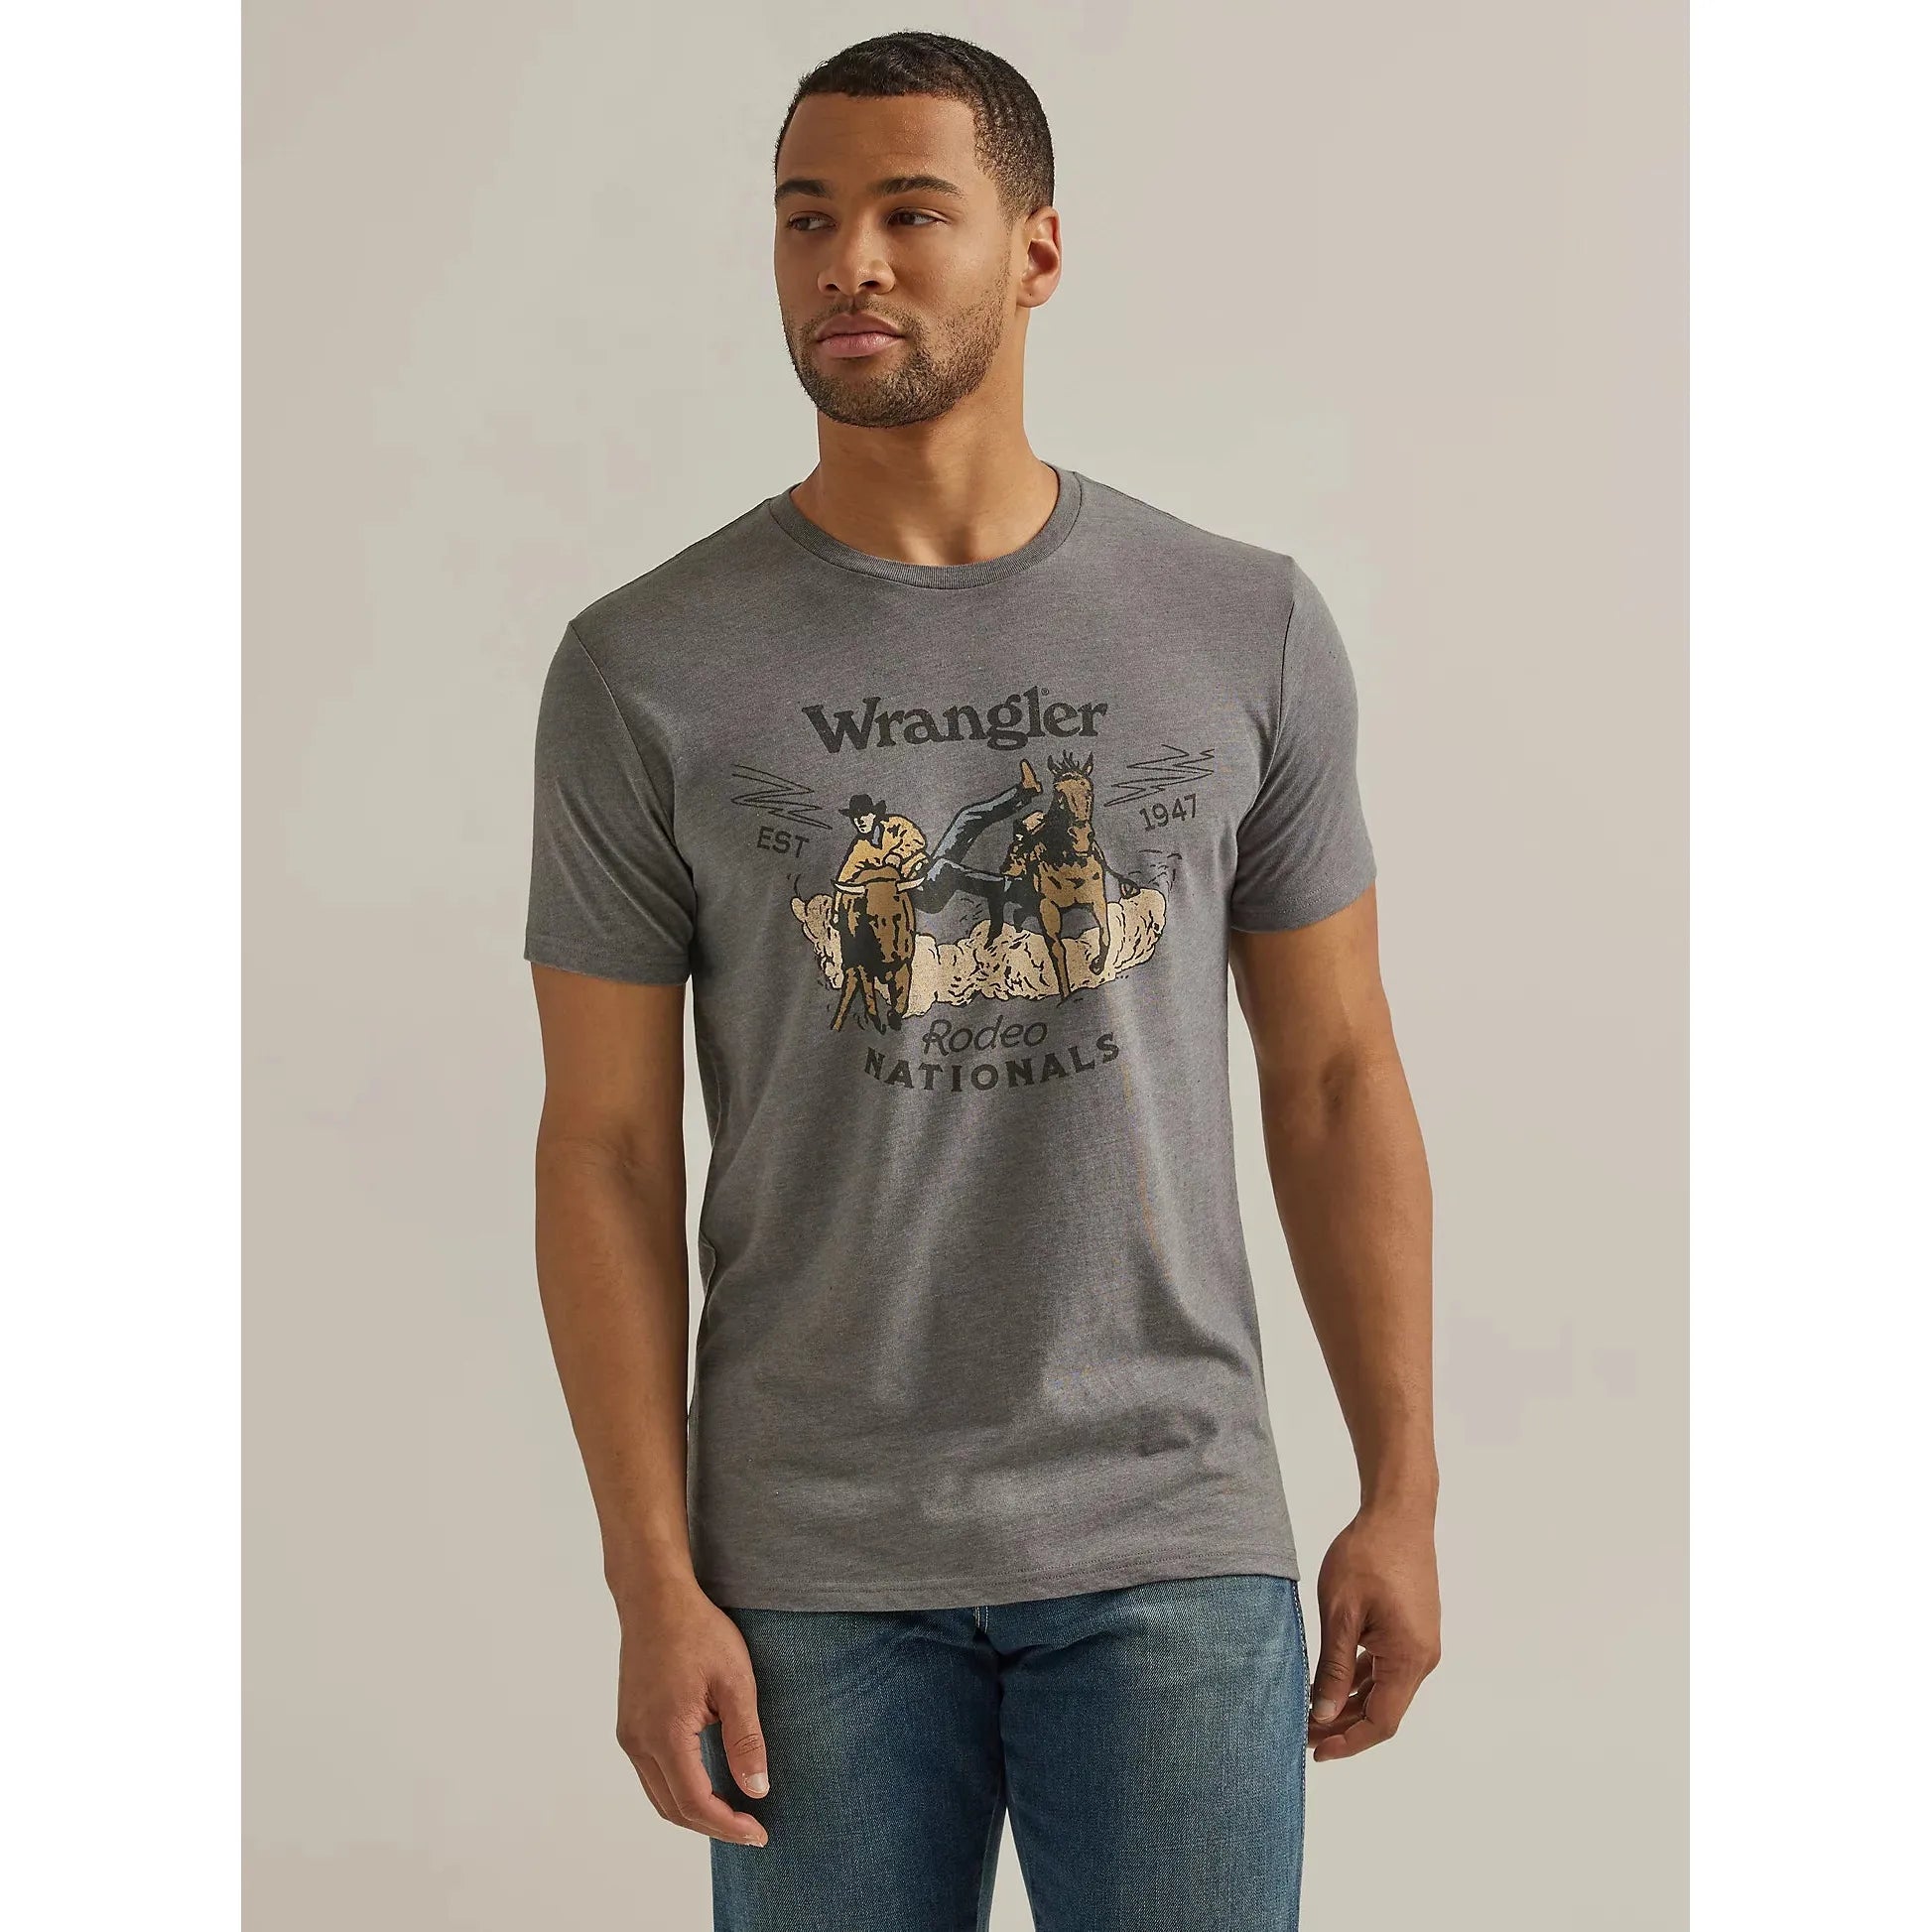 Men's  Wrangler RODEO NATIONALS GRAPHIC T-SHIRT IN PEWTER